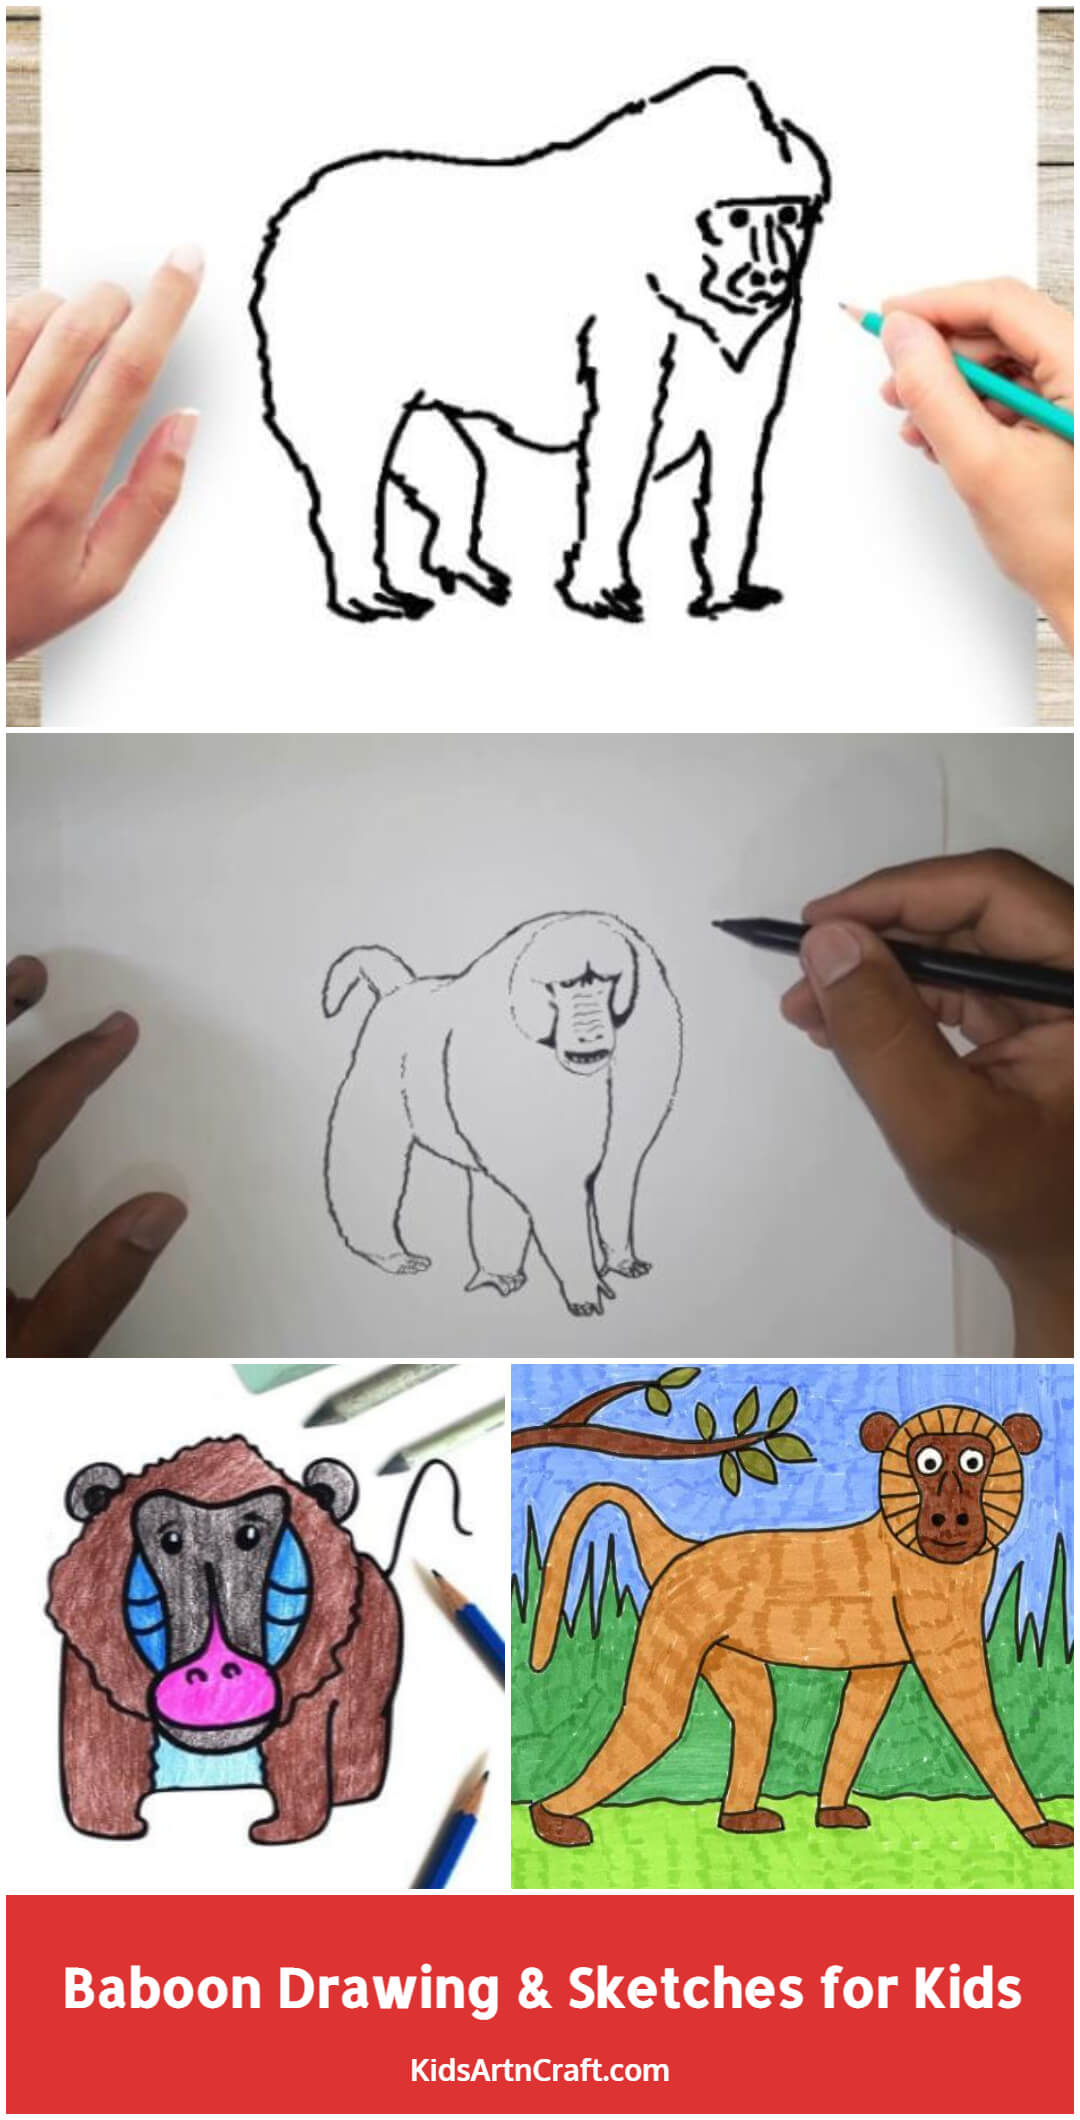 Baboon Drawing & Sketches for Kids